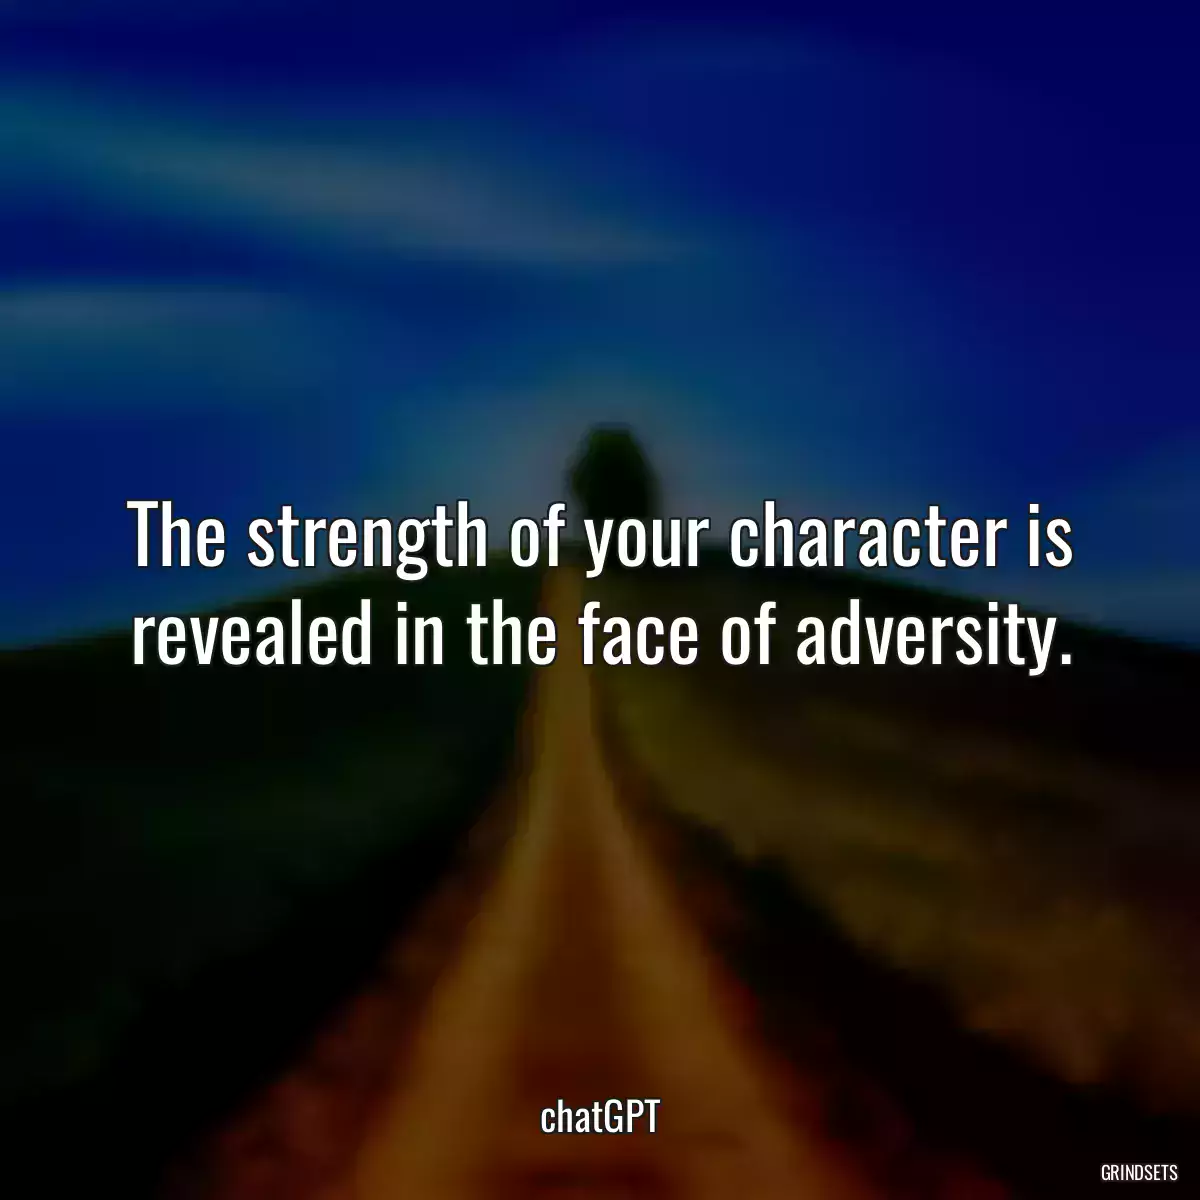 The strength of your character is revealed in the face of adversity.